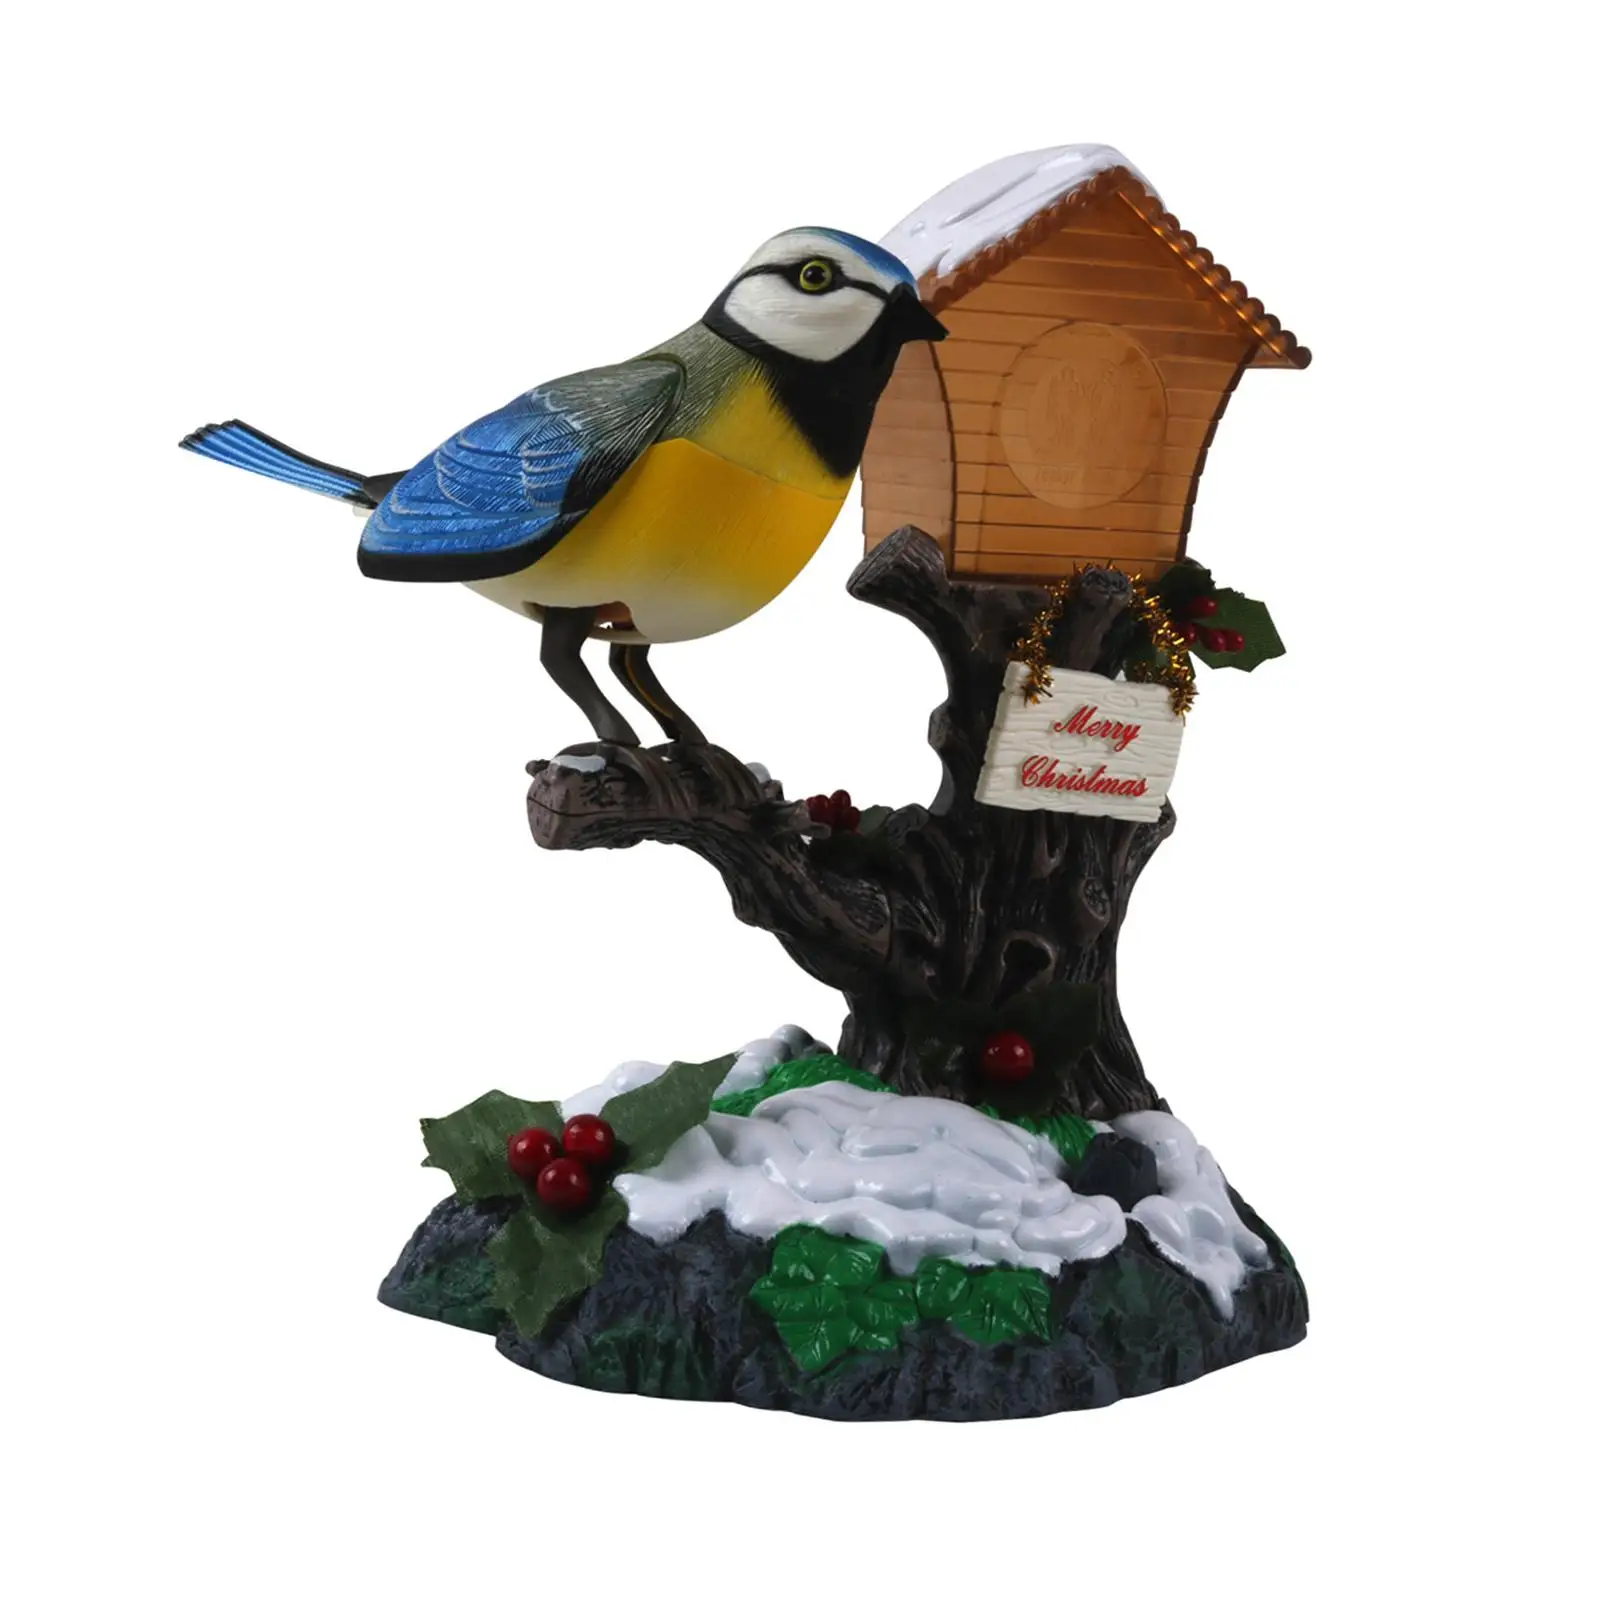 Realistic Talking Sound Control Bird Toy Great Desk and Room Accessory Plastic Activate Dancing Chirping Bird Home Ornaments